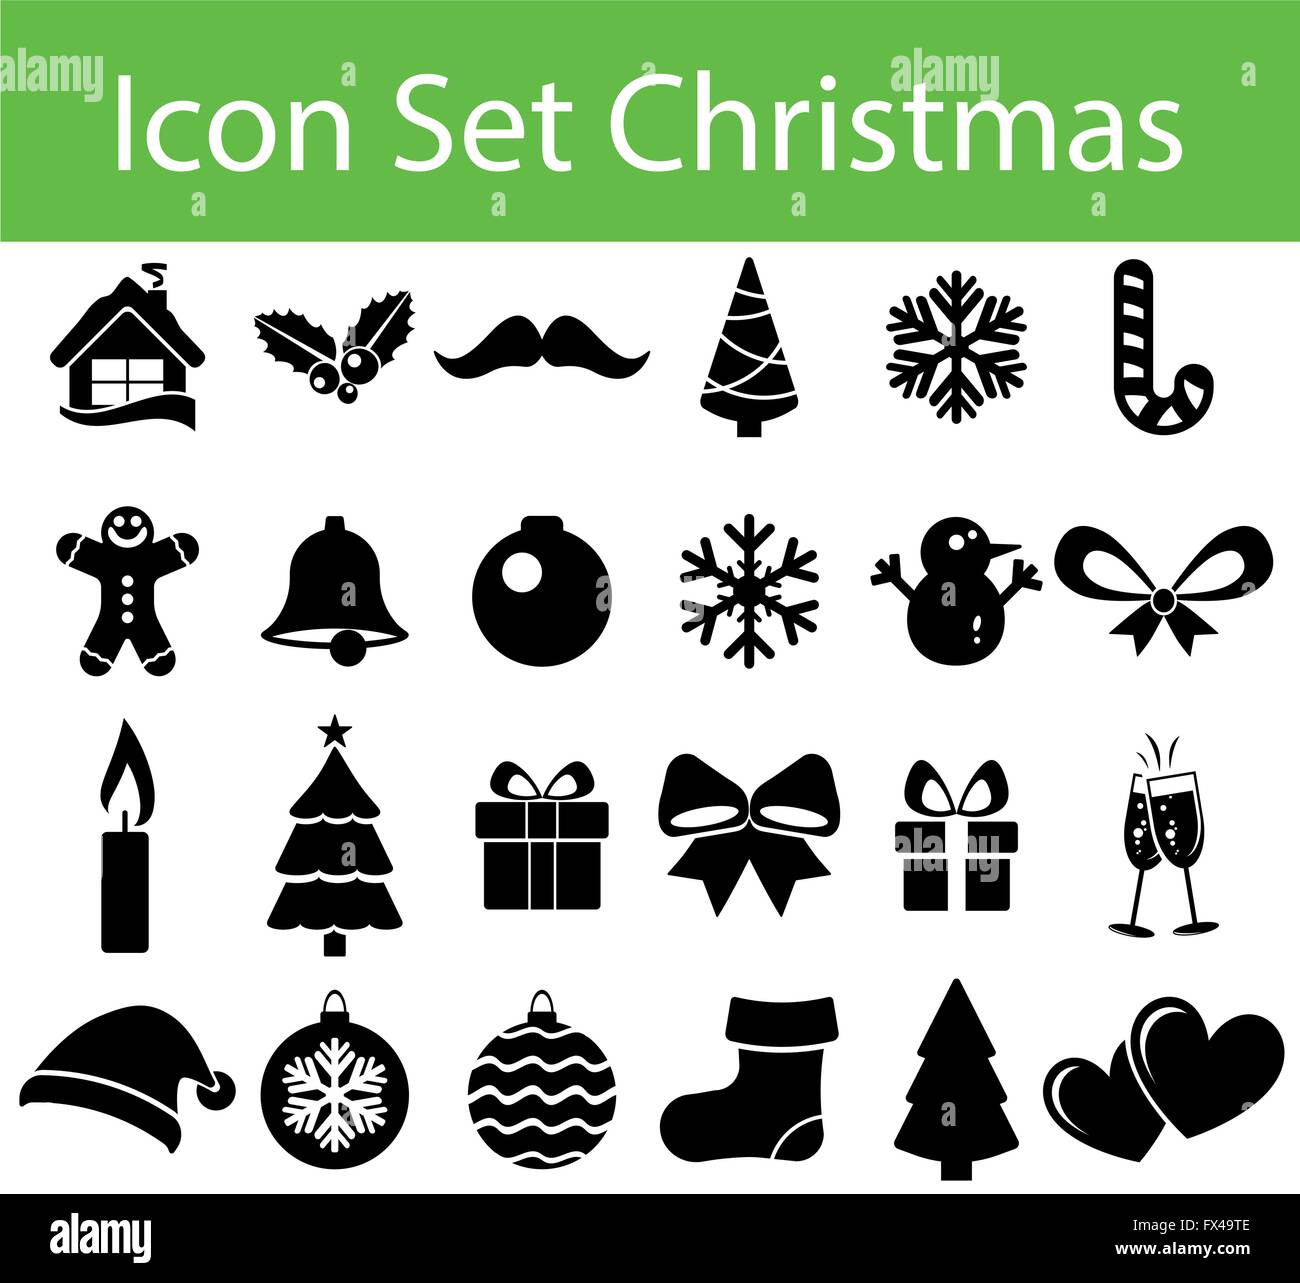 Icon Set Christmas with 24 icons for different purchase in web und graphic design Stock Vector